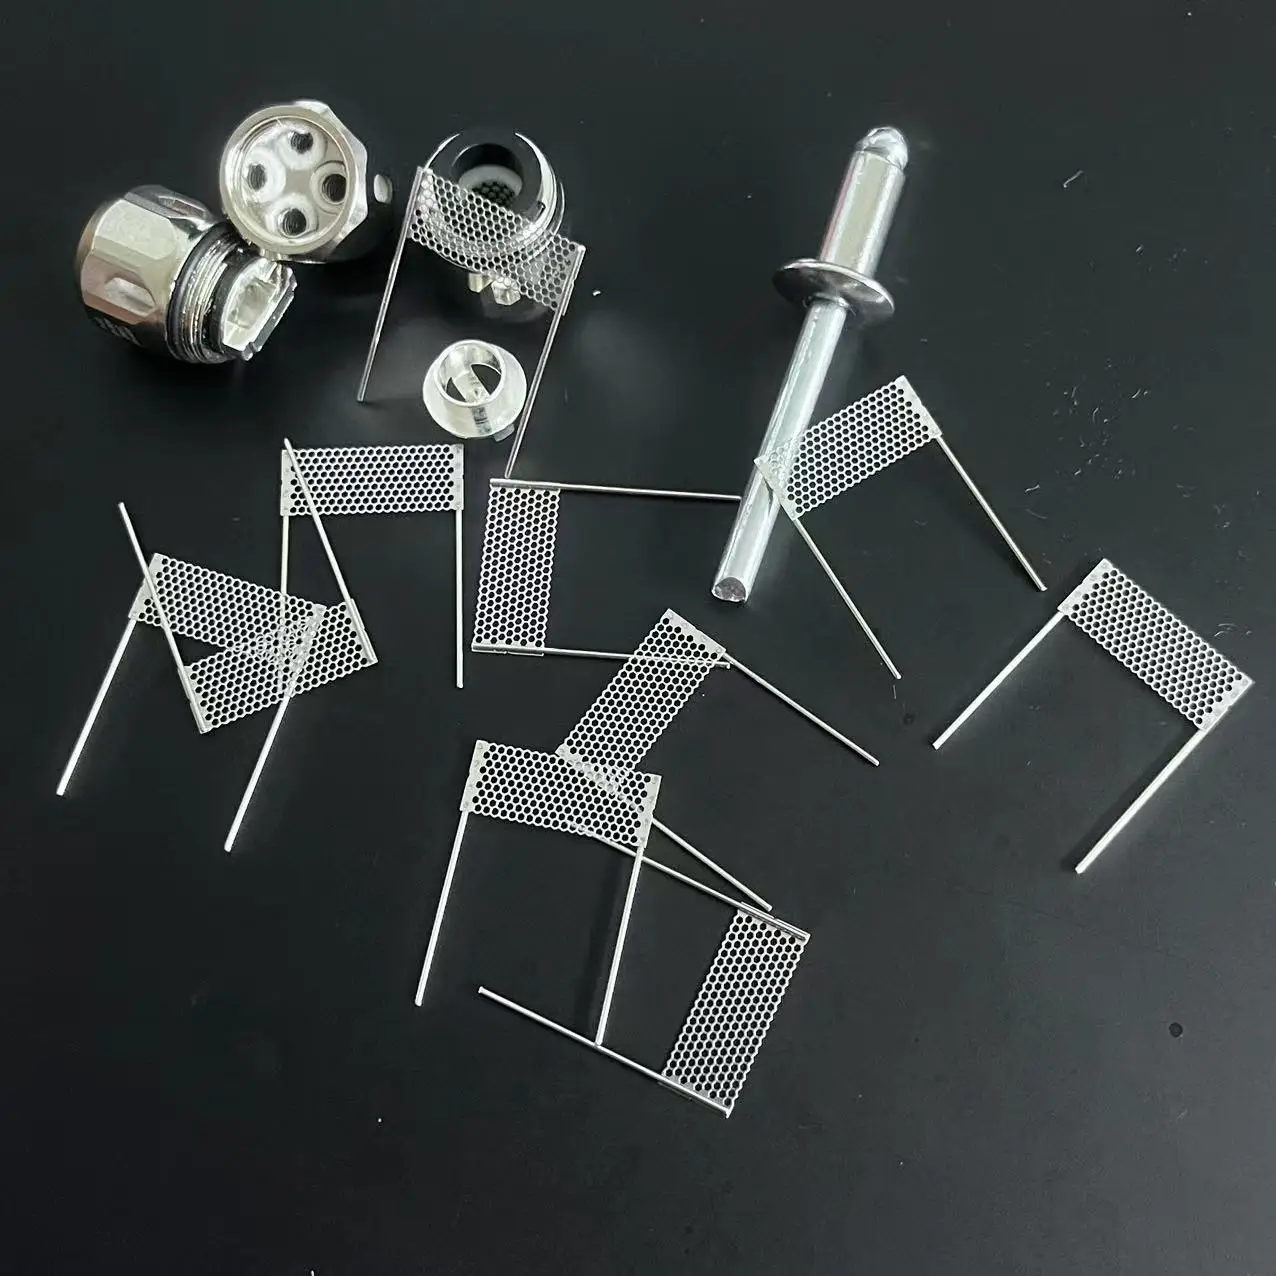 GT Rebuild Mesh Coil Kit DIY Replacement Core for Sky Solo Plus /SKRR/GEN S/NRG/Swag/Cascade Baby GT2 GT8 GT Mesh Metal Tool